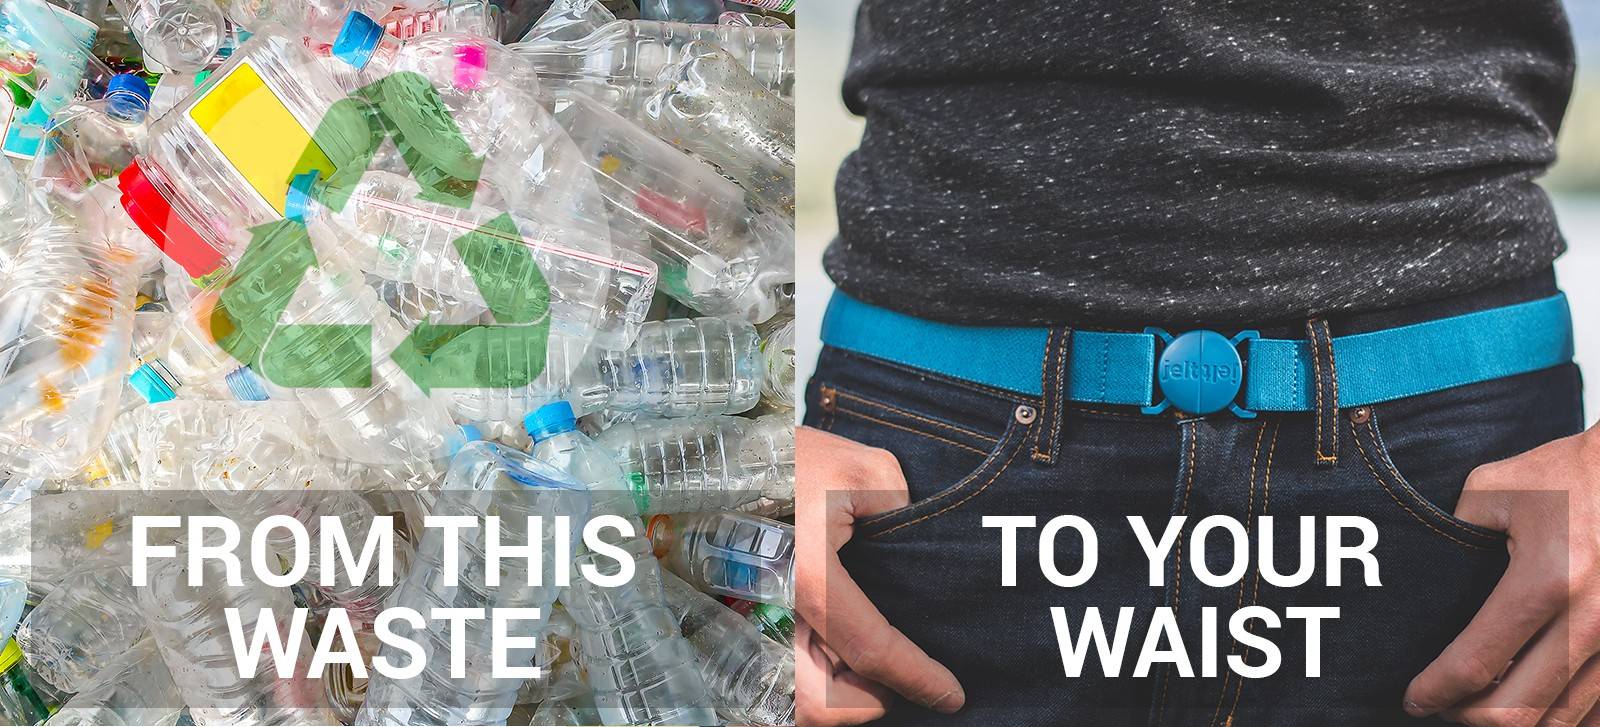 From this waste (photo of plastic bottles) to your waist (image of man wearing River Turquoise Jelt elastic stretch belt with dark shirt and dark jeans)